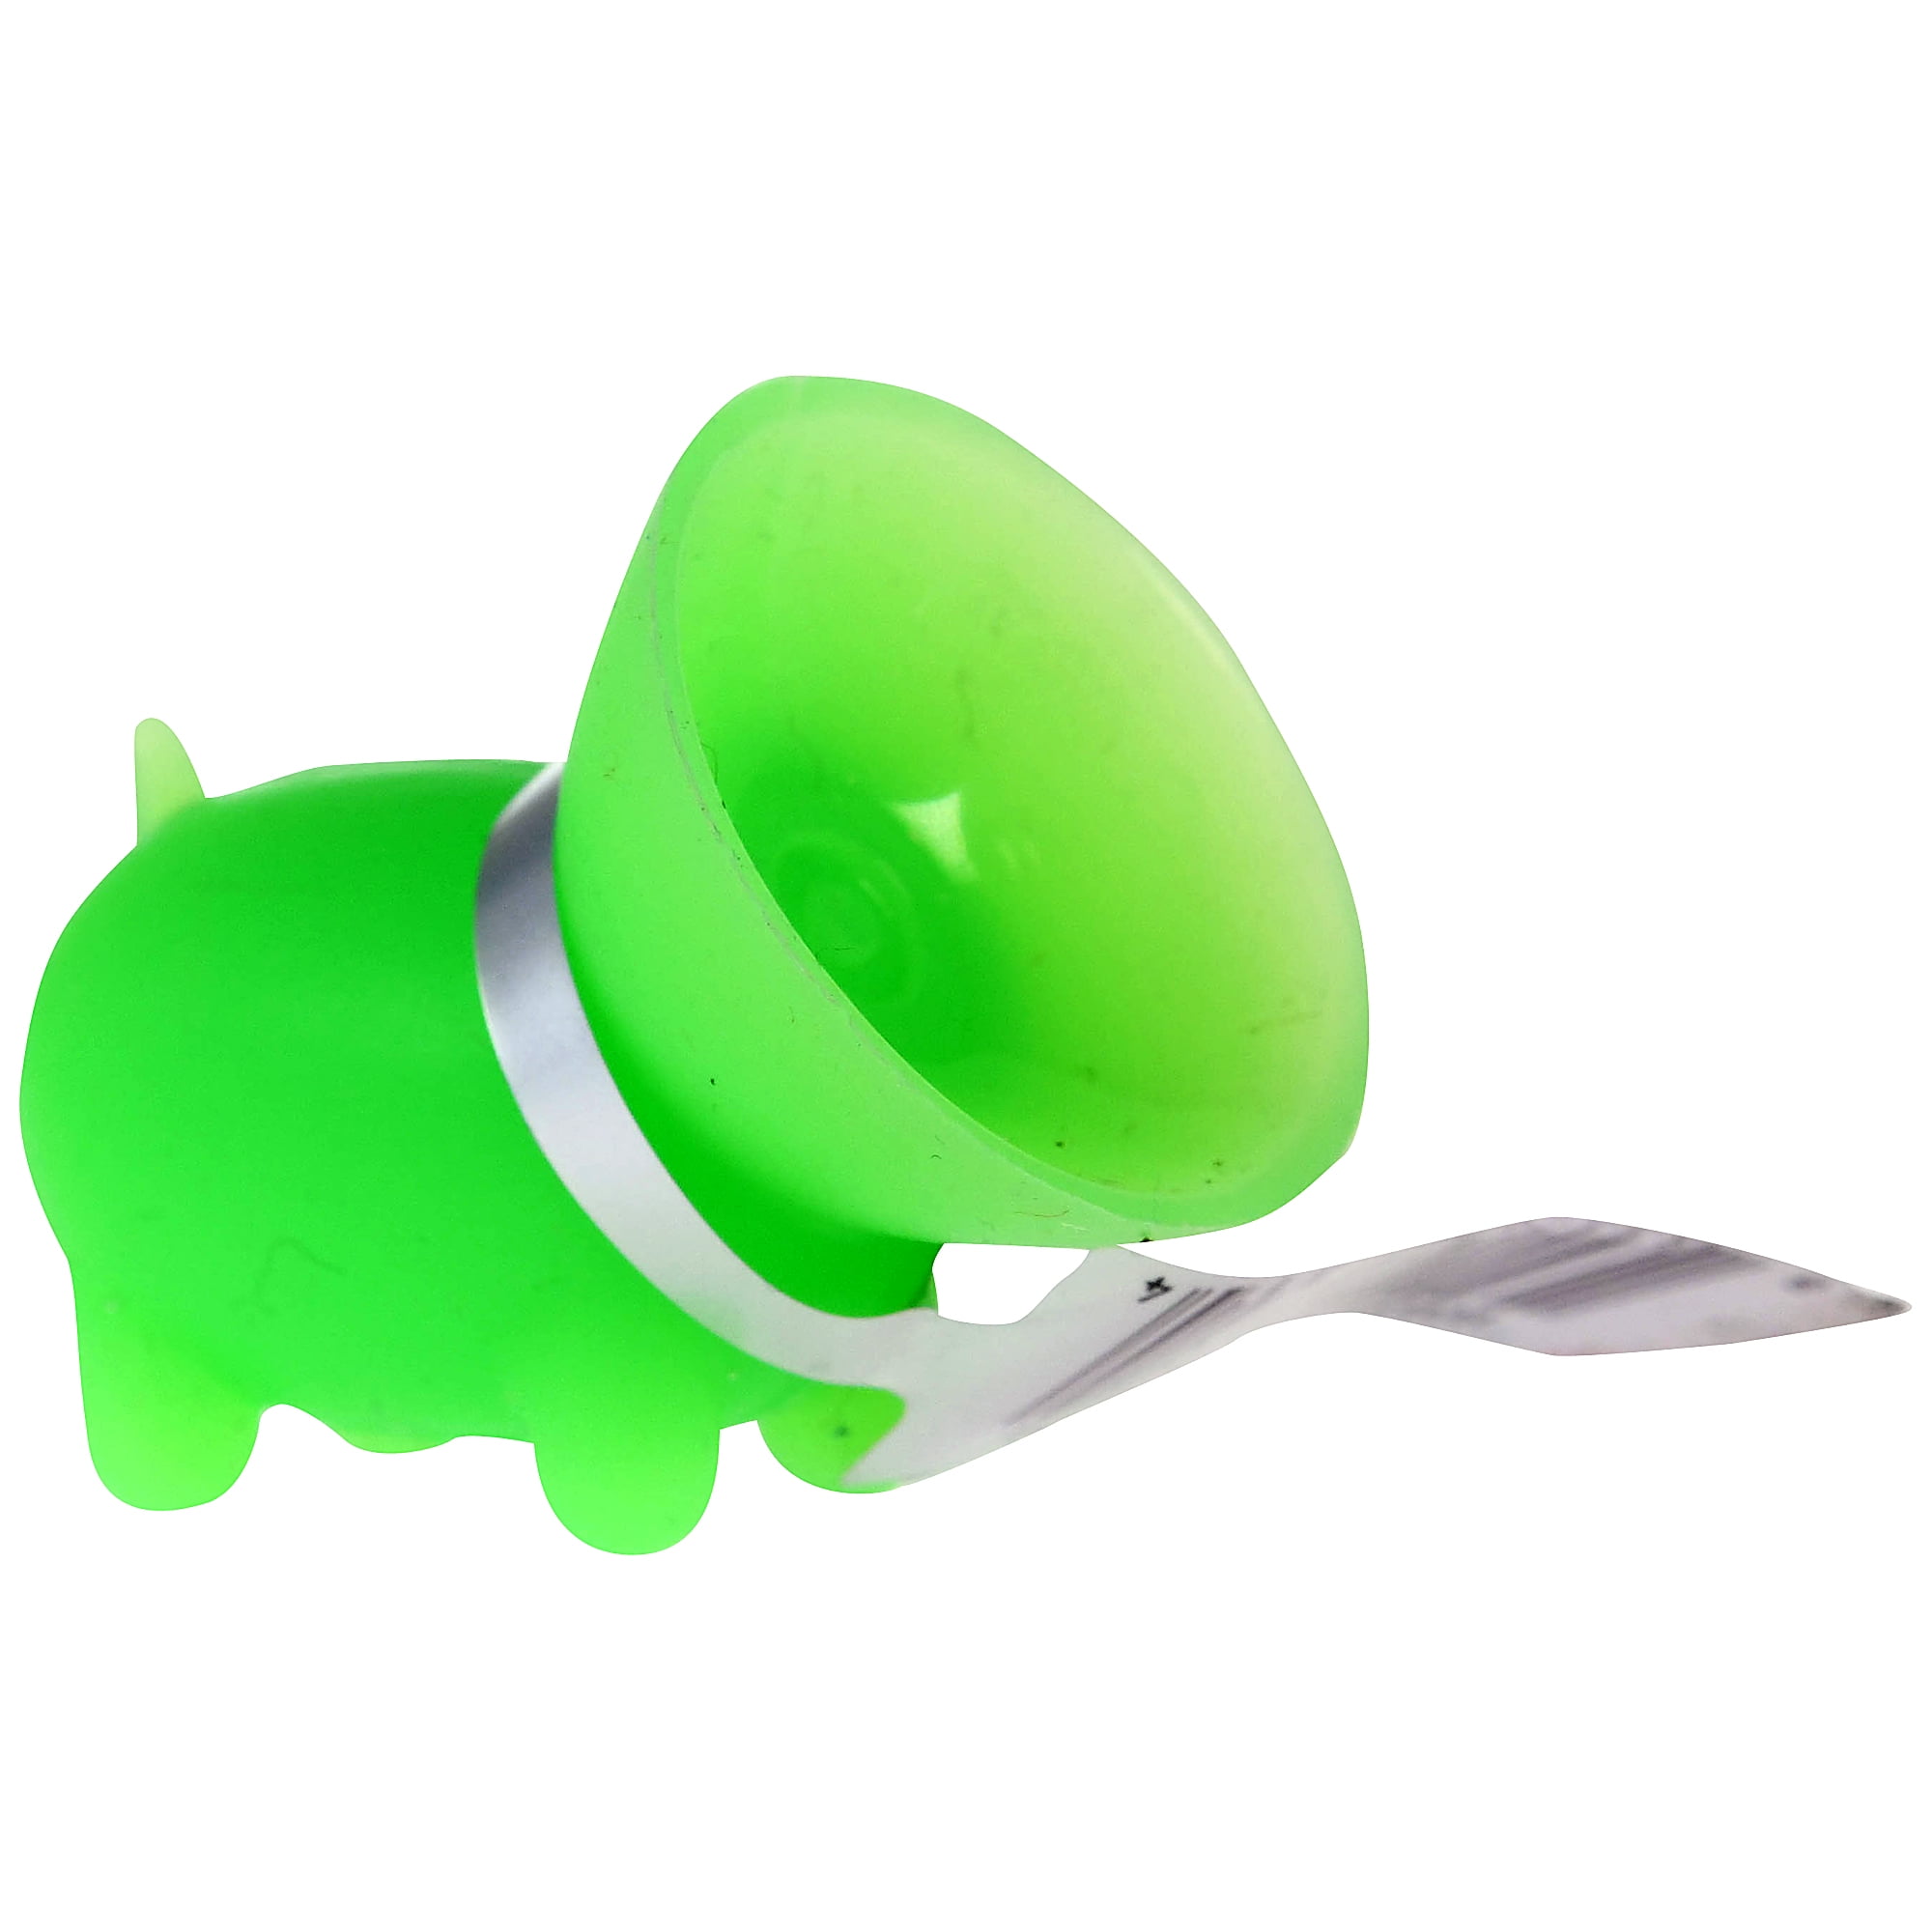  Killer Concepts The Original Piggy Cell Phone Stand / Cell  Phone Accessory (50 Count Display) : Cell Phones & Accessories